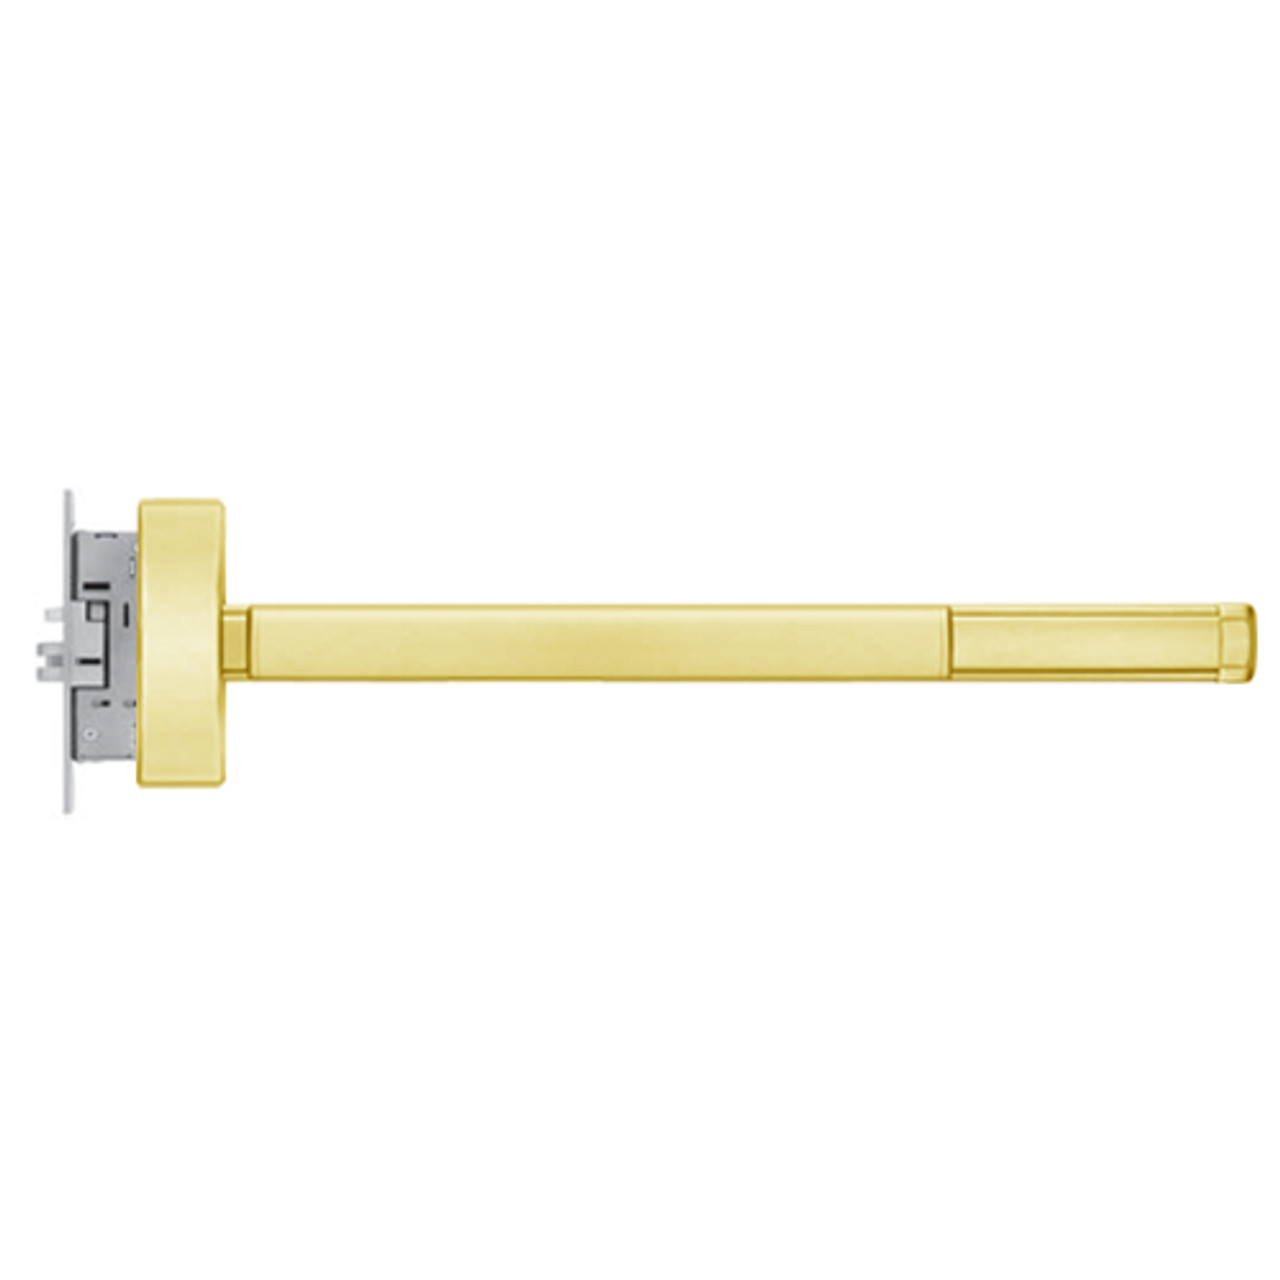 FL2308-LHR-605-48 PHI 2300 Series Fire Rated Apex Mortise Exit Device Prepped for Key Controls Lever/Knob in Bright Brass Finish